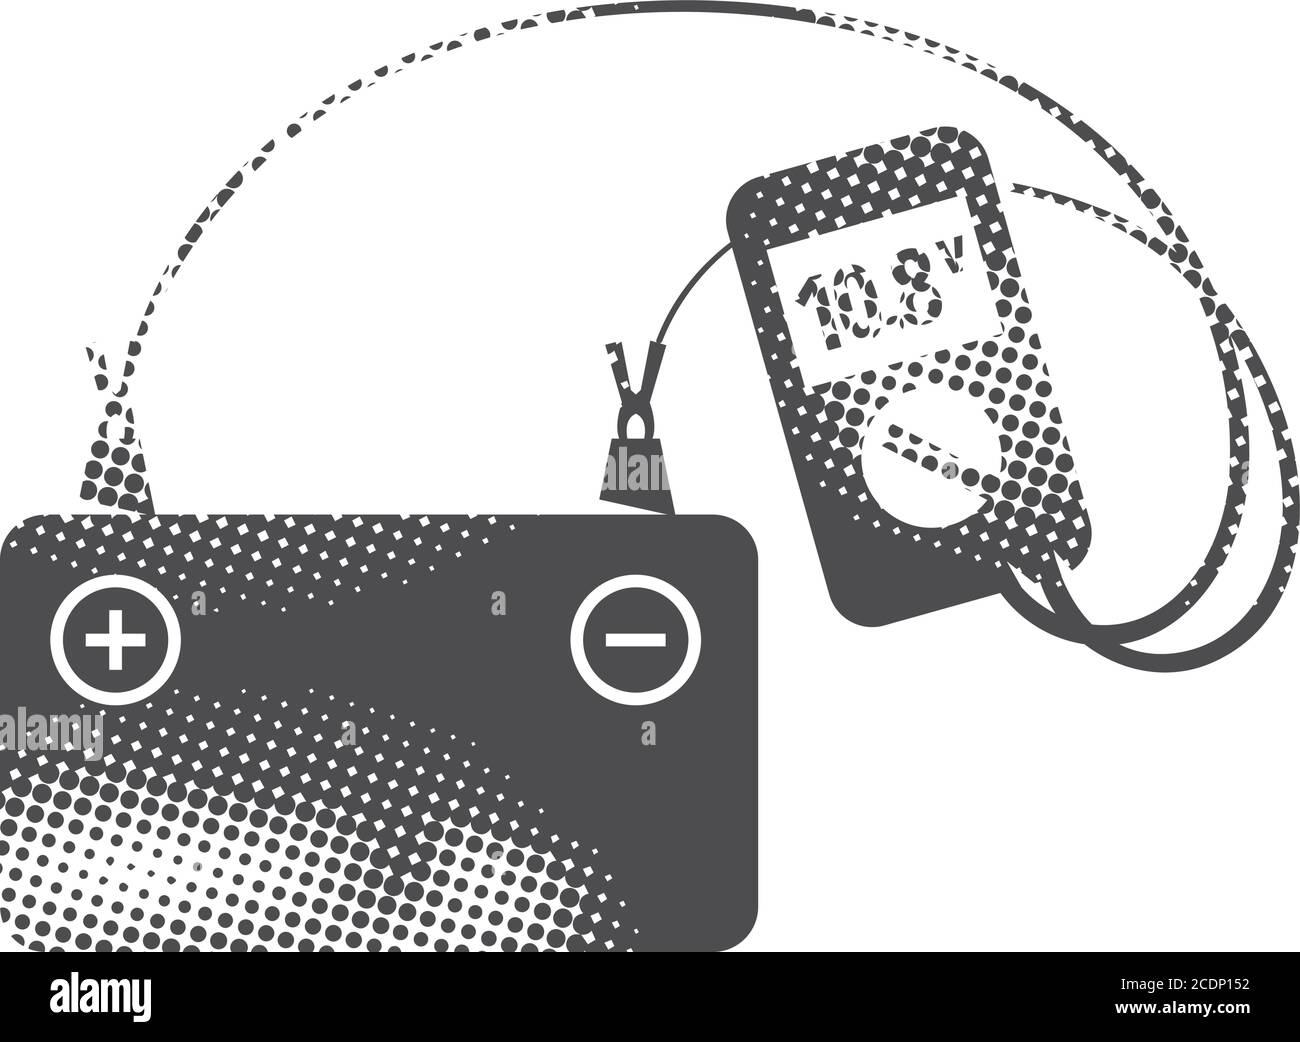 Car battery and multimeter icons in halftone style. Automotive vehicle maintenance service. Black and white monochrome vector illustration. Stock Vector